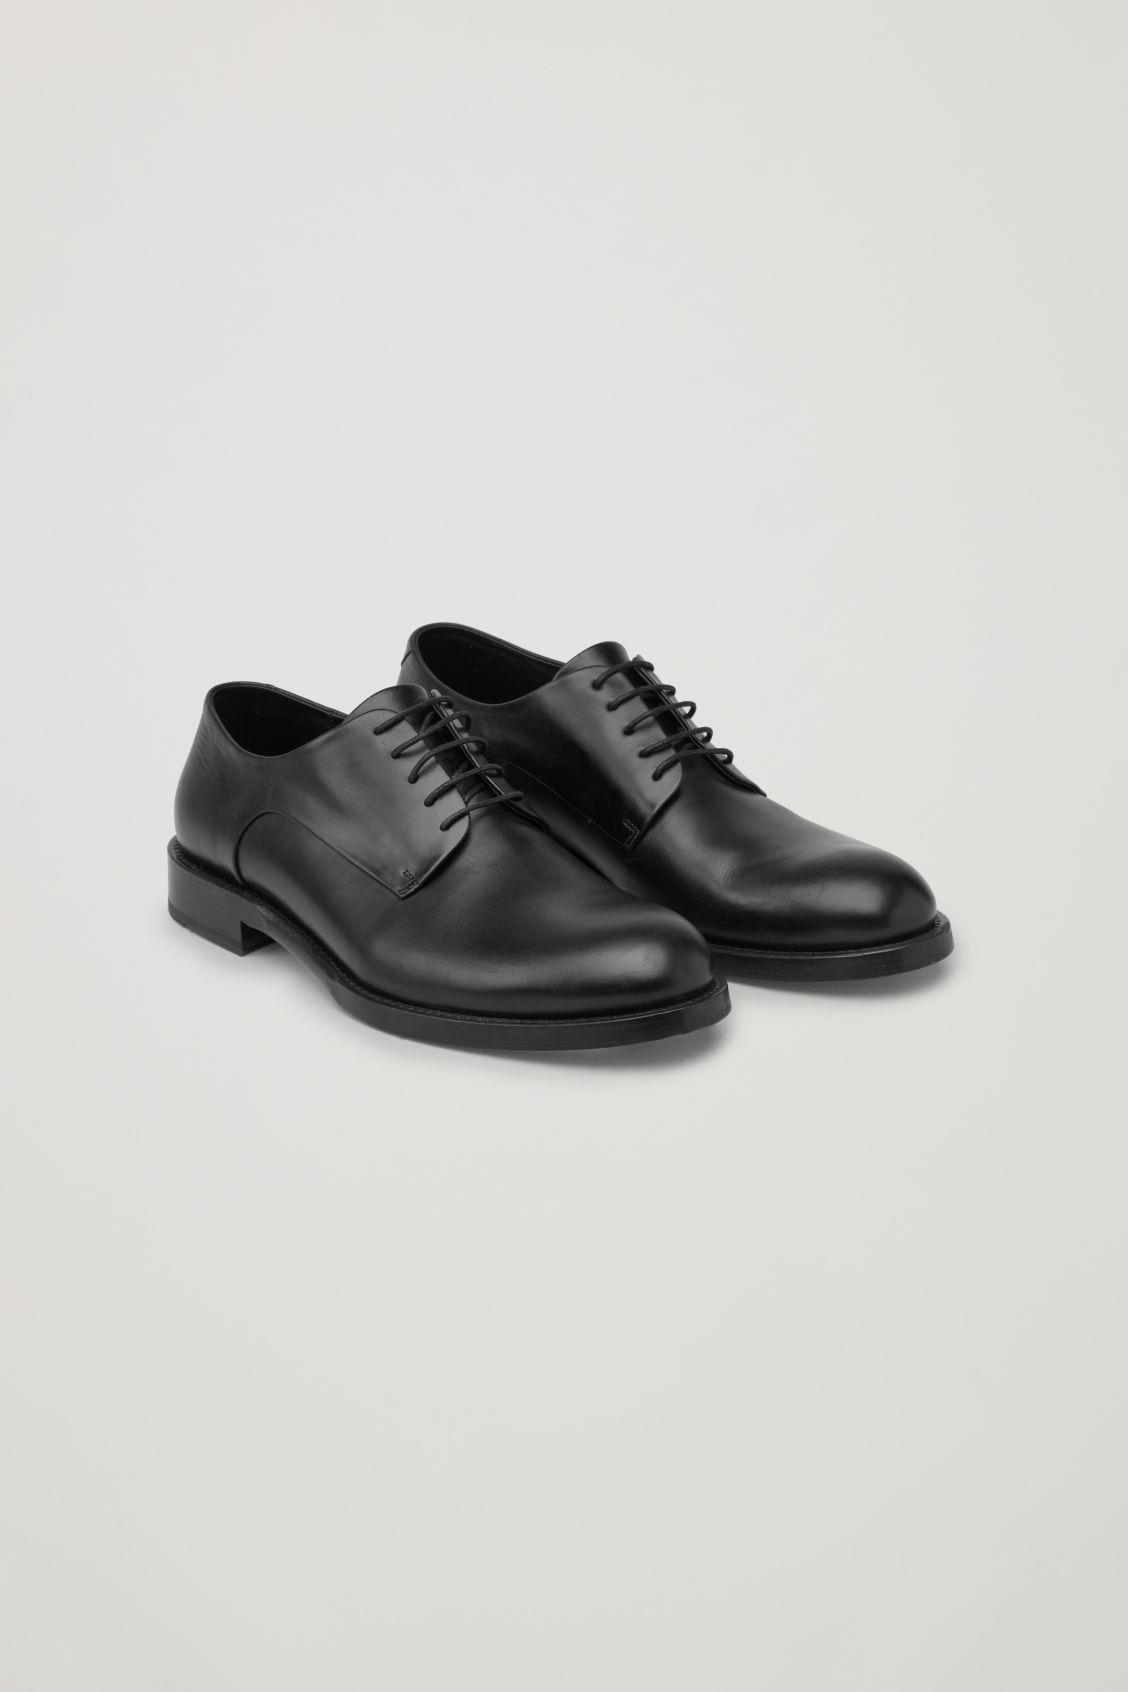 COS Matte-leather Derby Shoes in Black for Men - Lyst